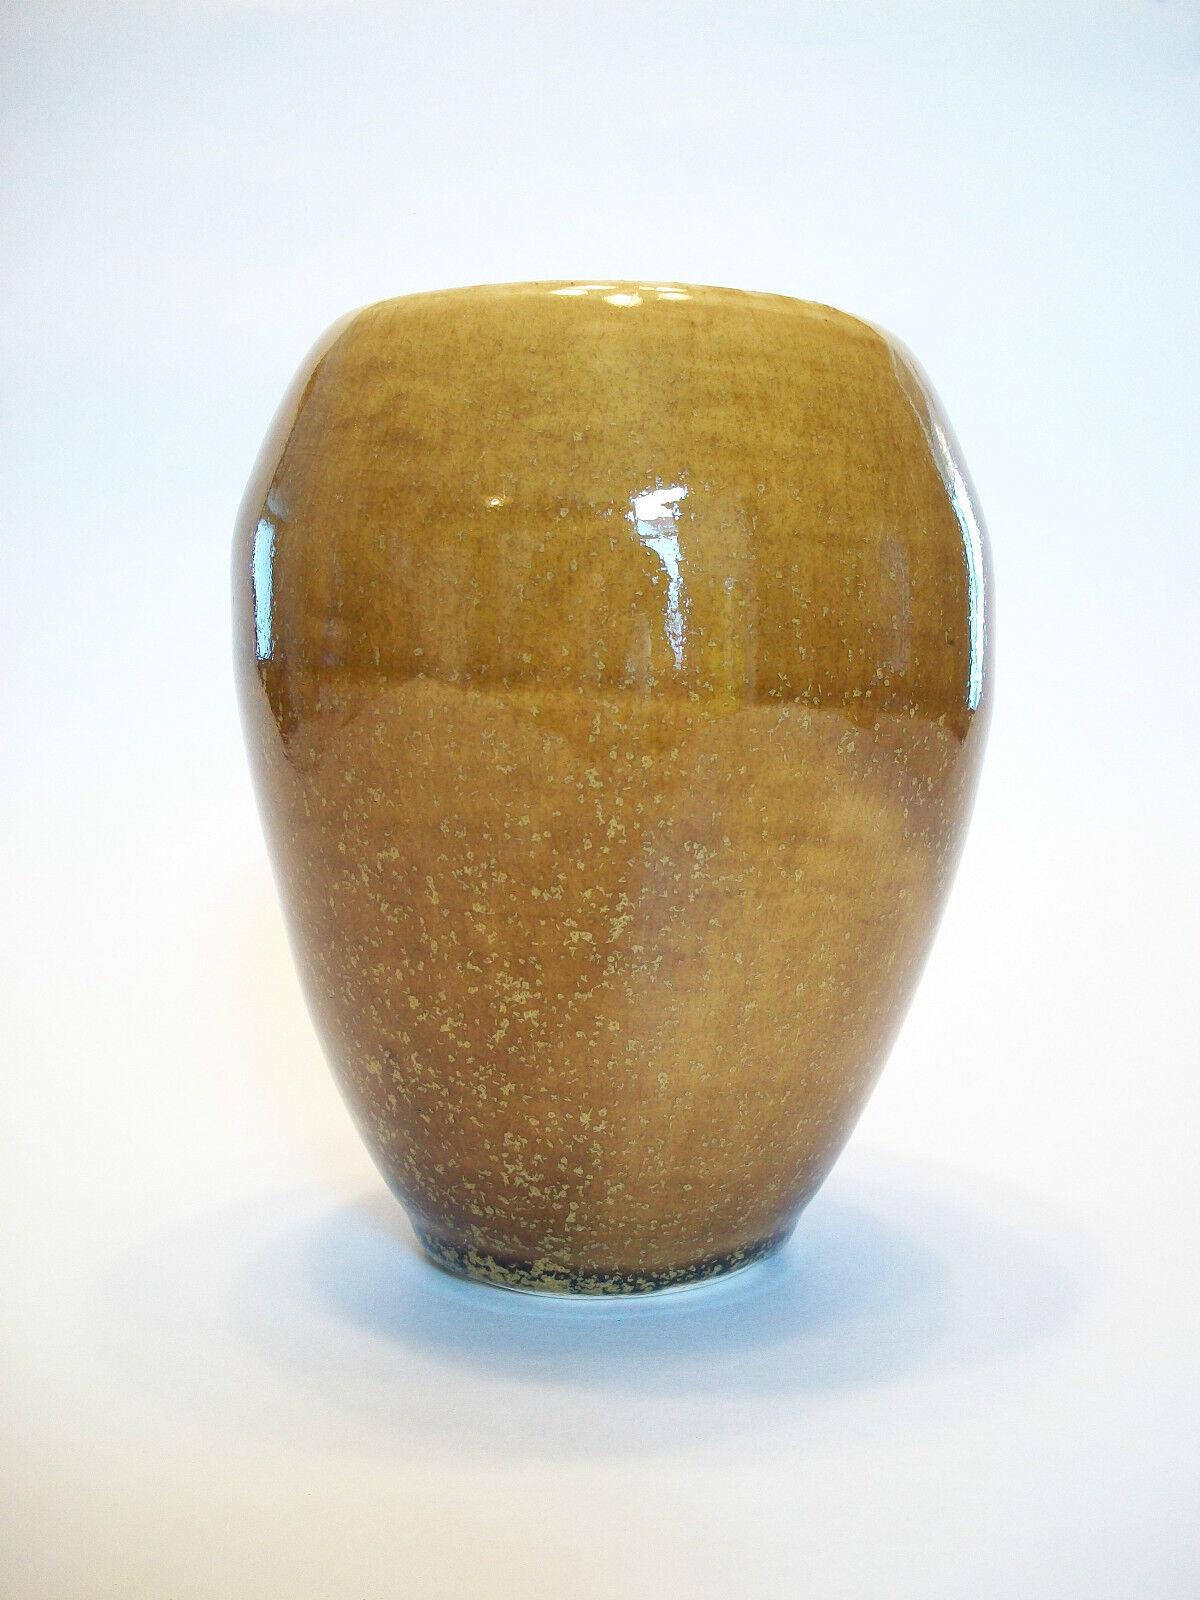 Ceramic Vintage Glazed/Thrown Studio Pottery Vase - Signed - Canada - Late 20th Century For Sale